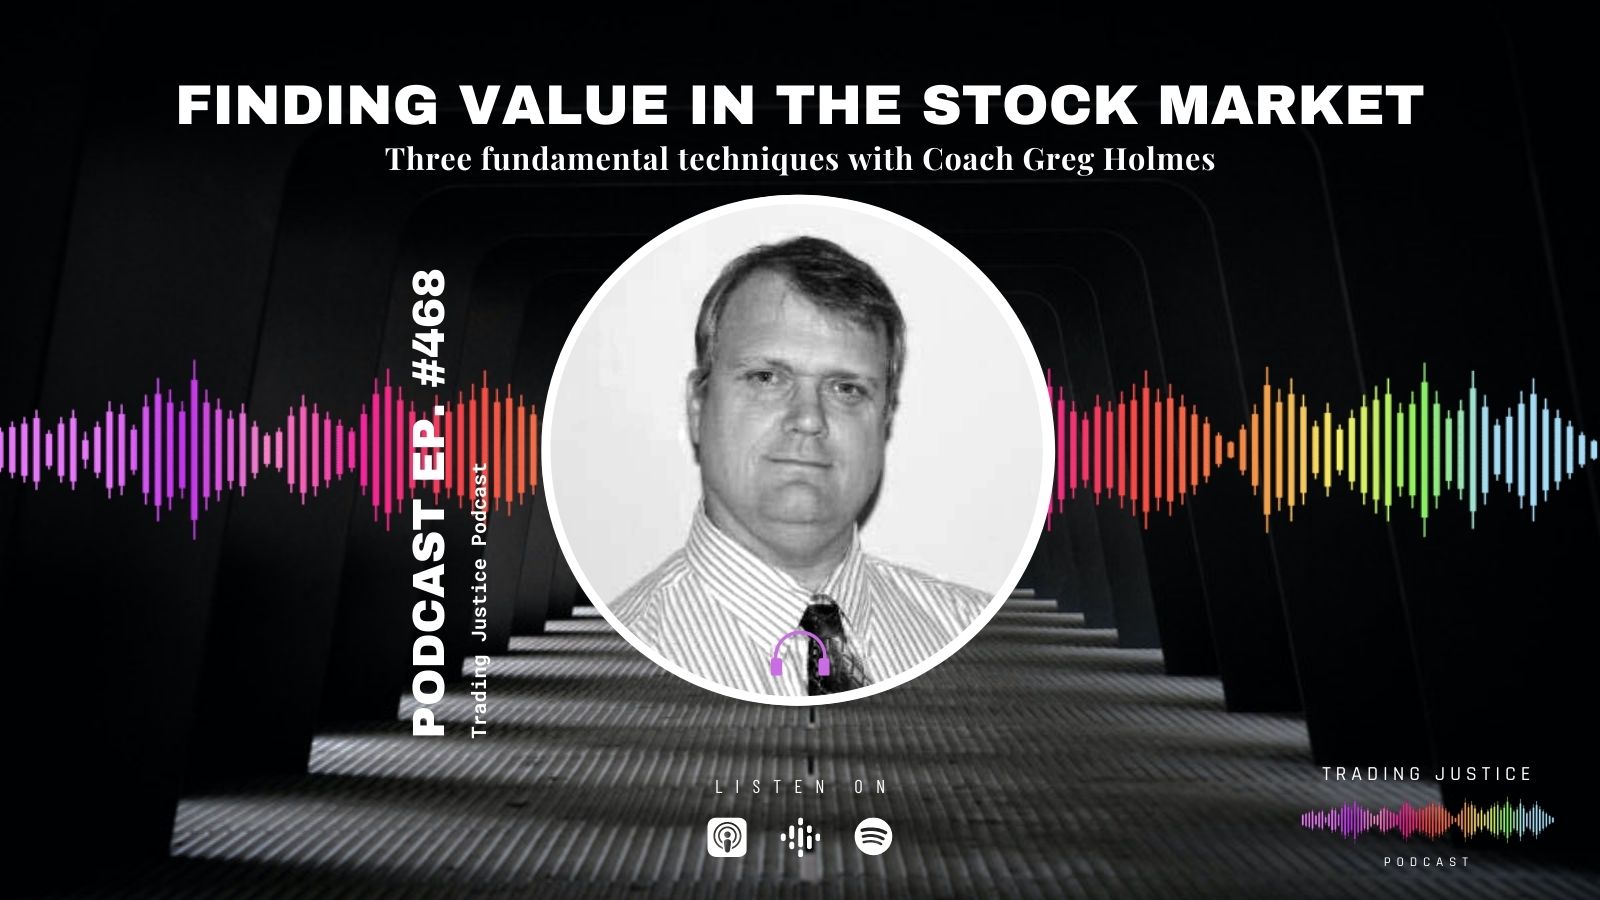 Trading Justice 468: Finding Value in the Stock Market